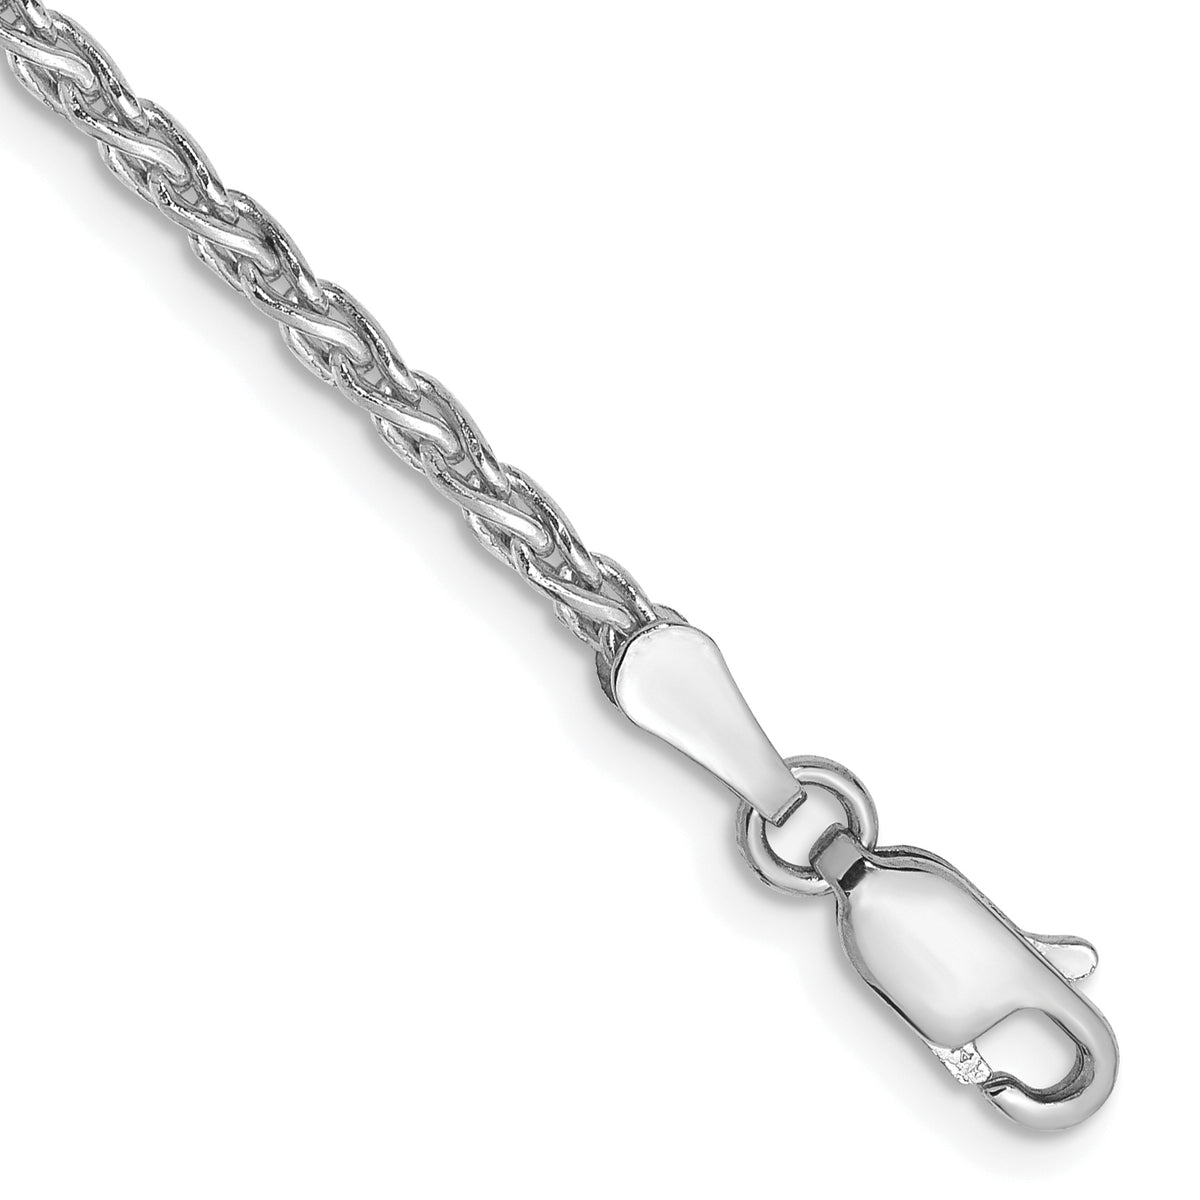 14K White Gold 8 inch 2.25mm Parisian Wheat with Lobster Clasp Bracelet